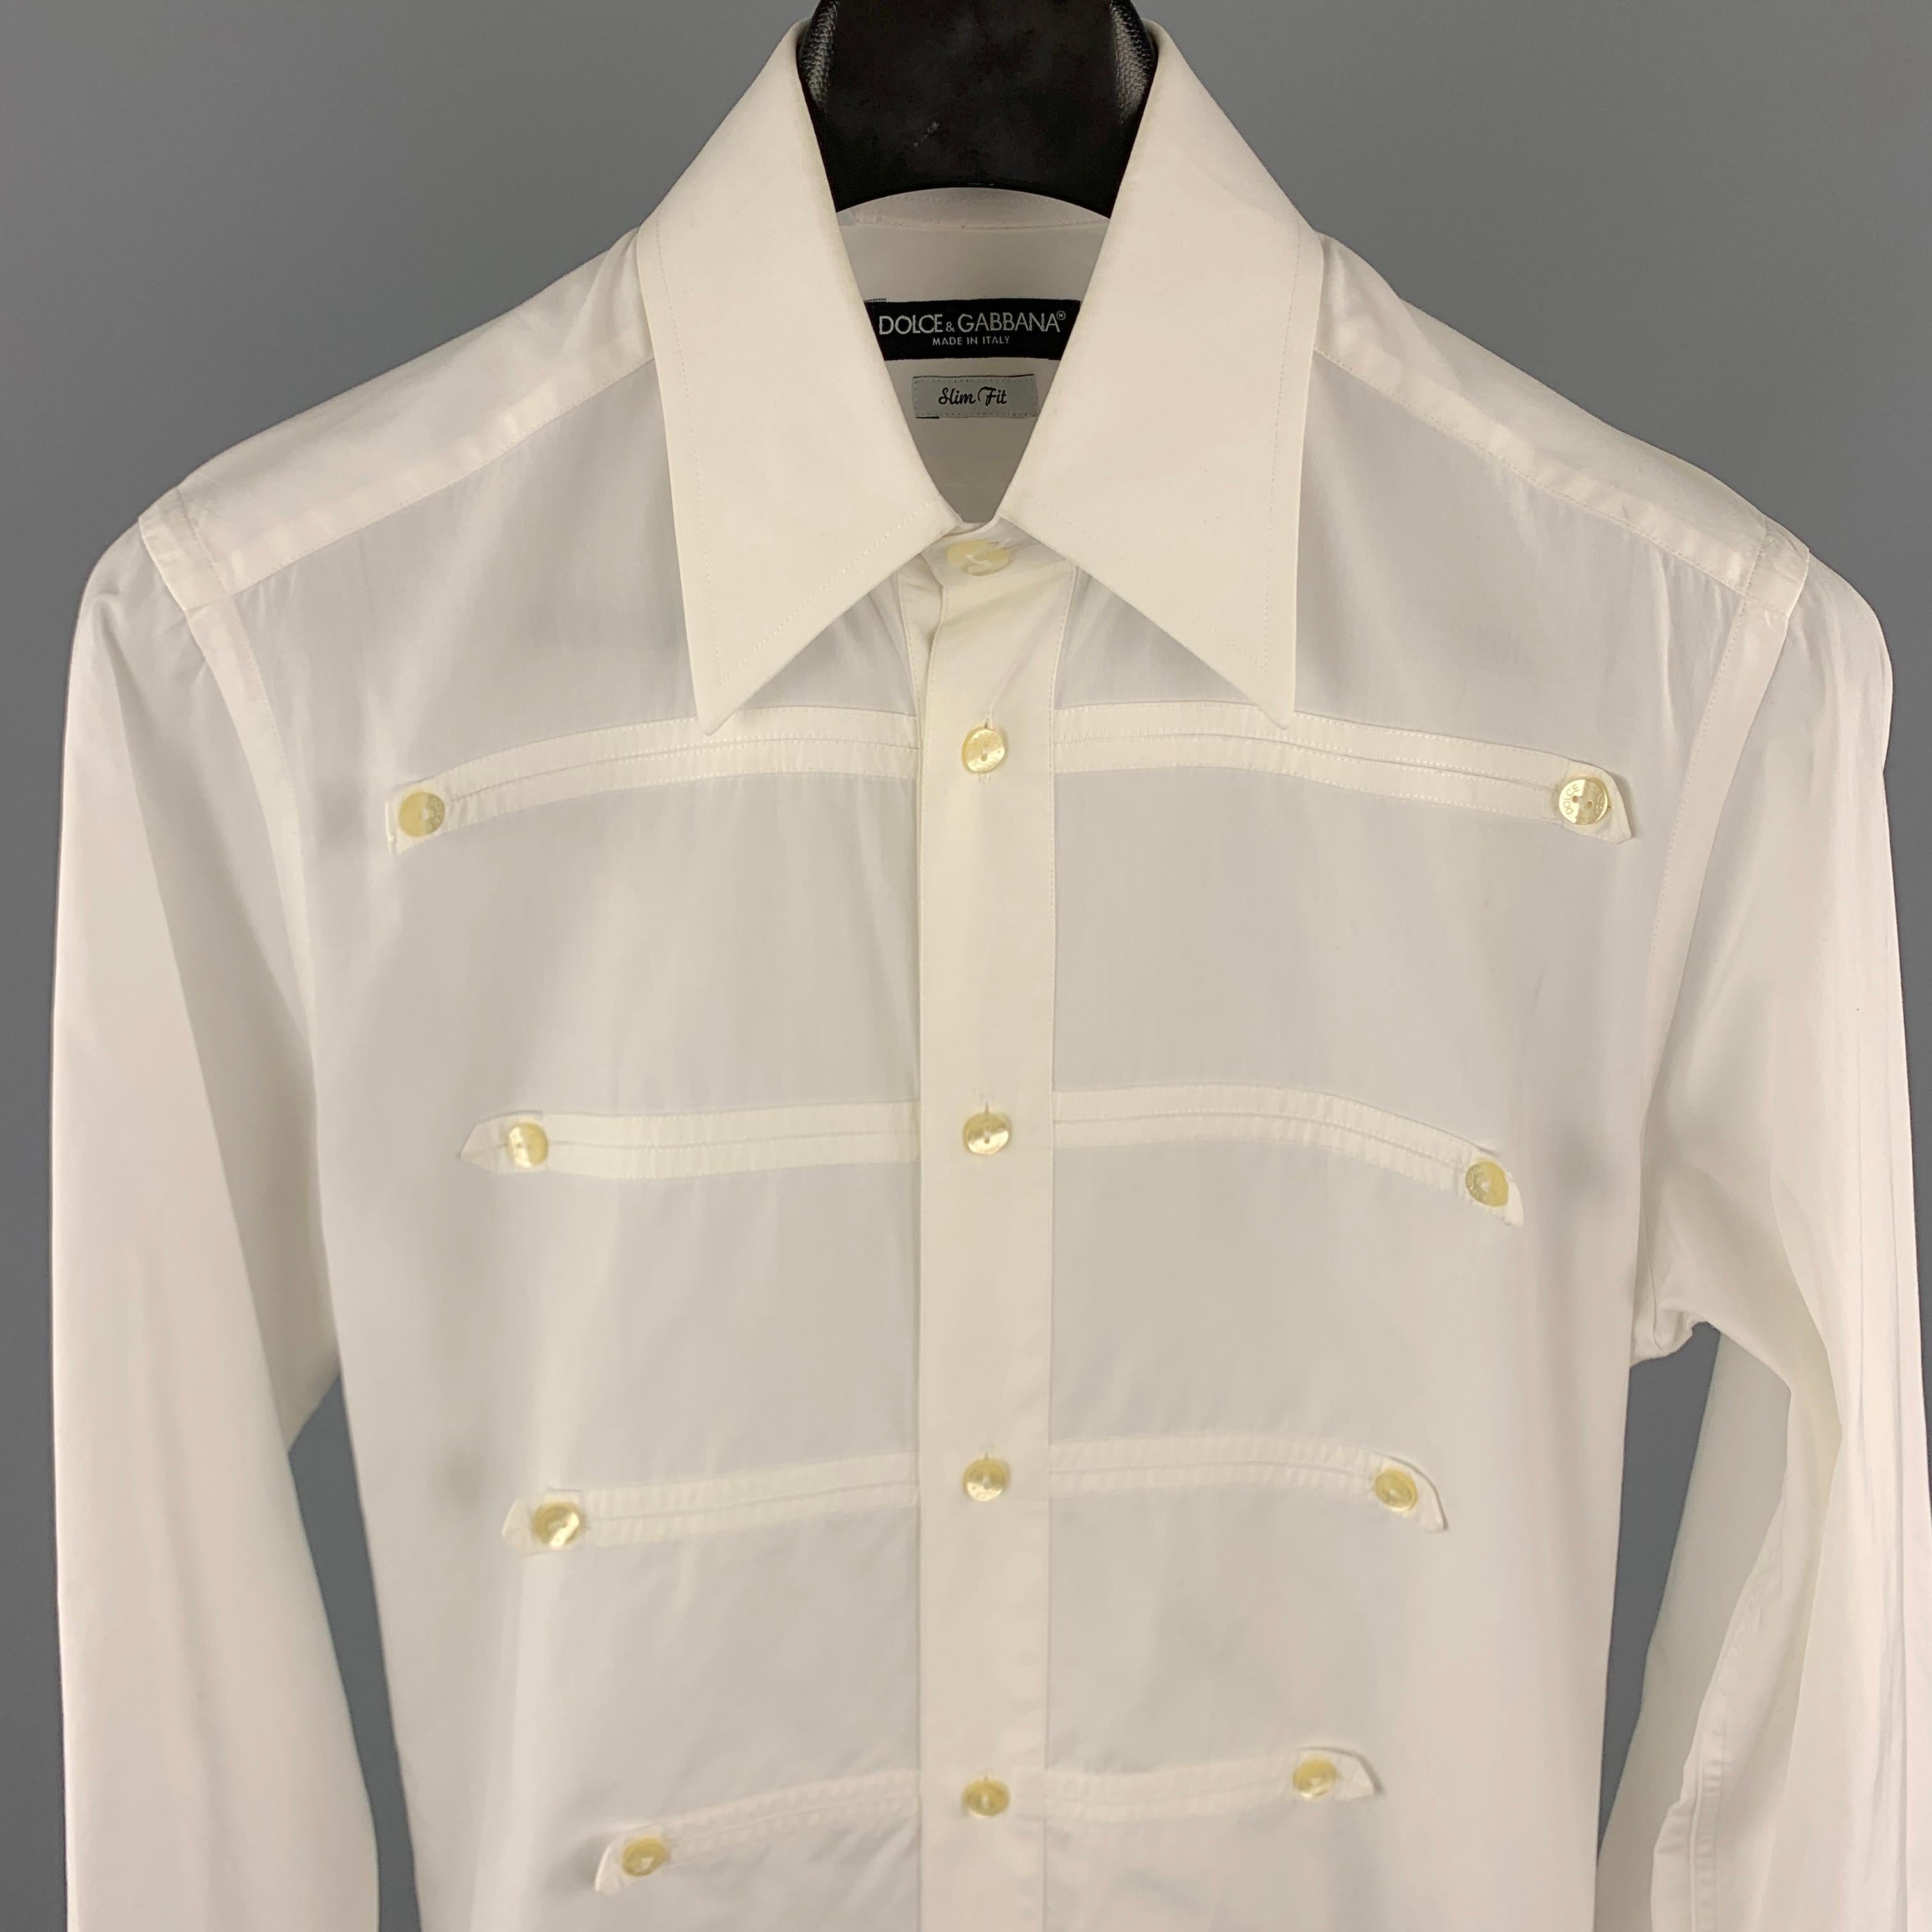 DOLCE & GABBANA Long Sleeve Shirt comes in a white tone in a solid cotton material, with a pointed collar, button details at front, pleat at back, buttoned cuffs, button up.  Minor wear. Made in Italy.

Very Good Pre-Owned Condition.
Marked: 15 /